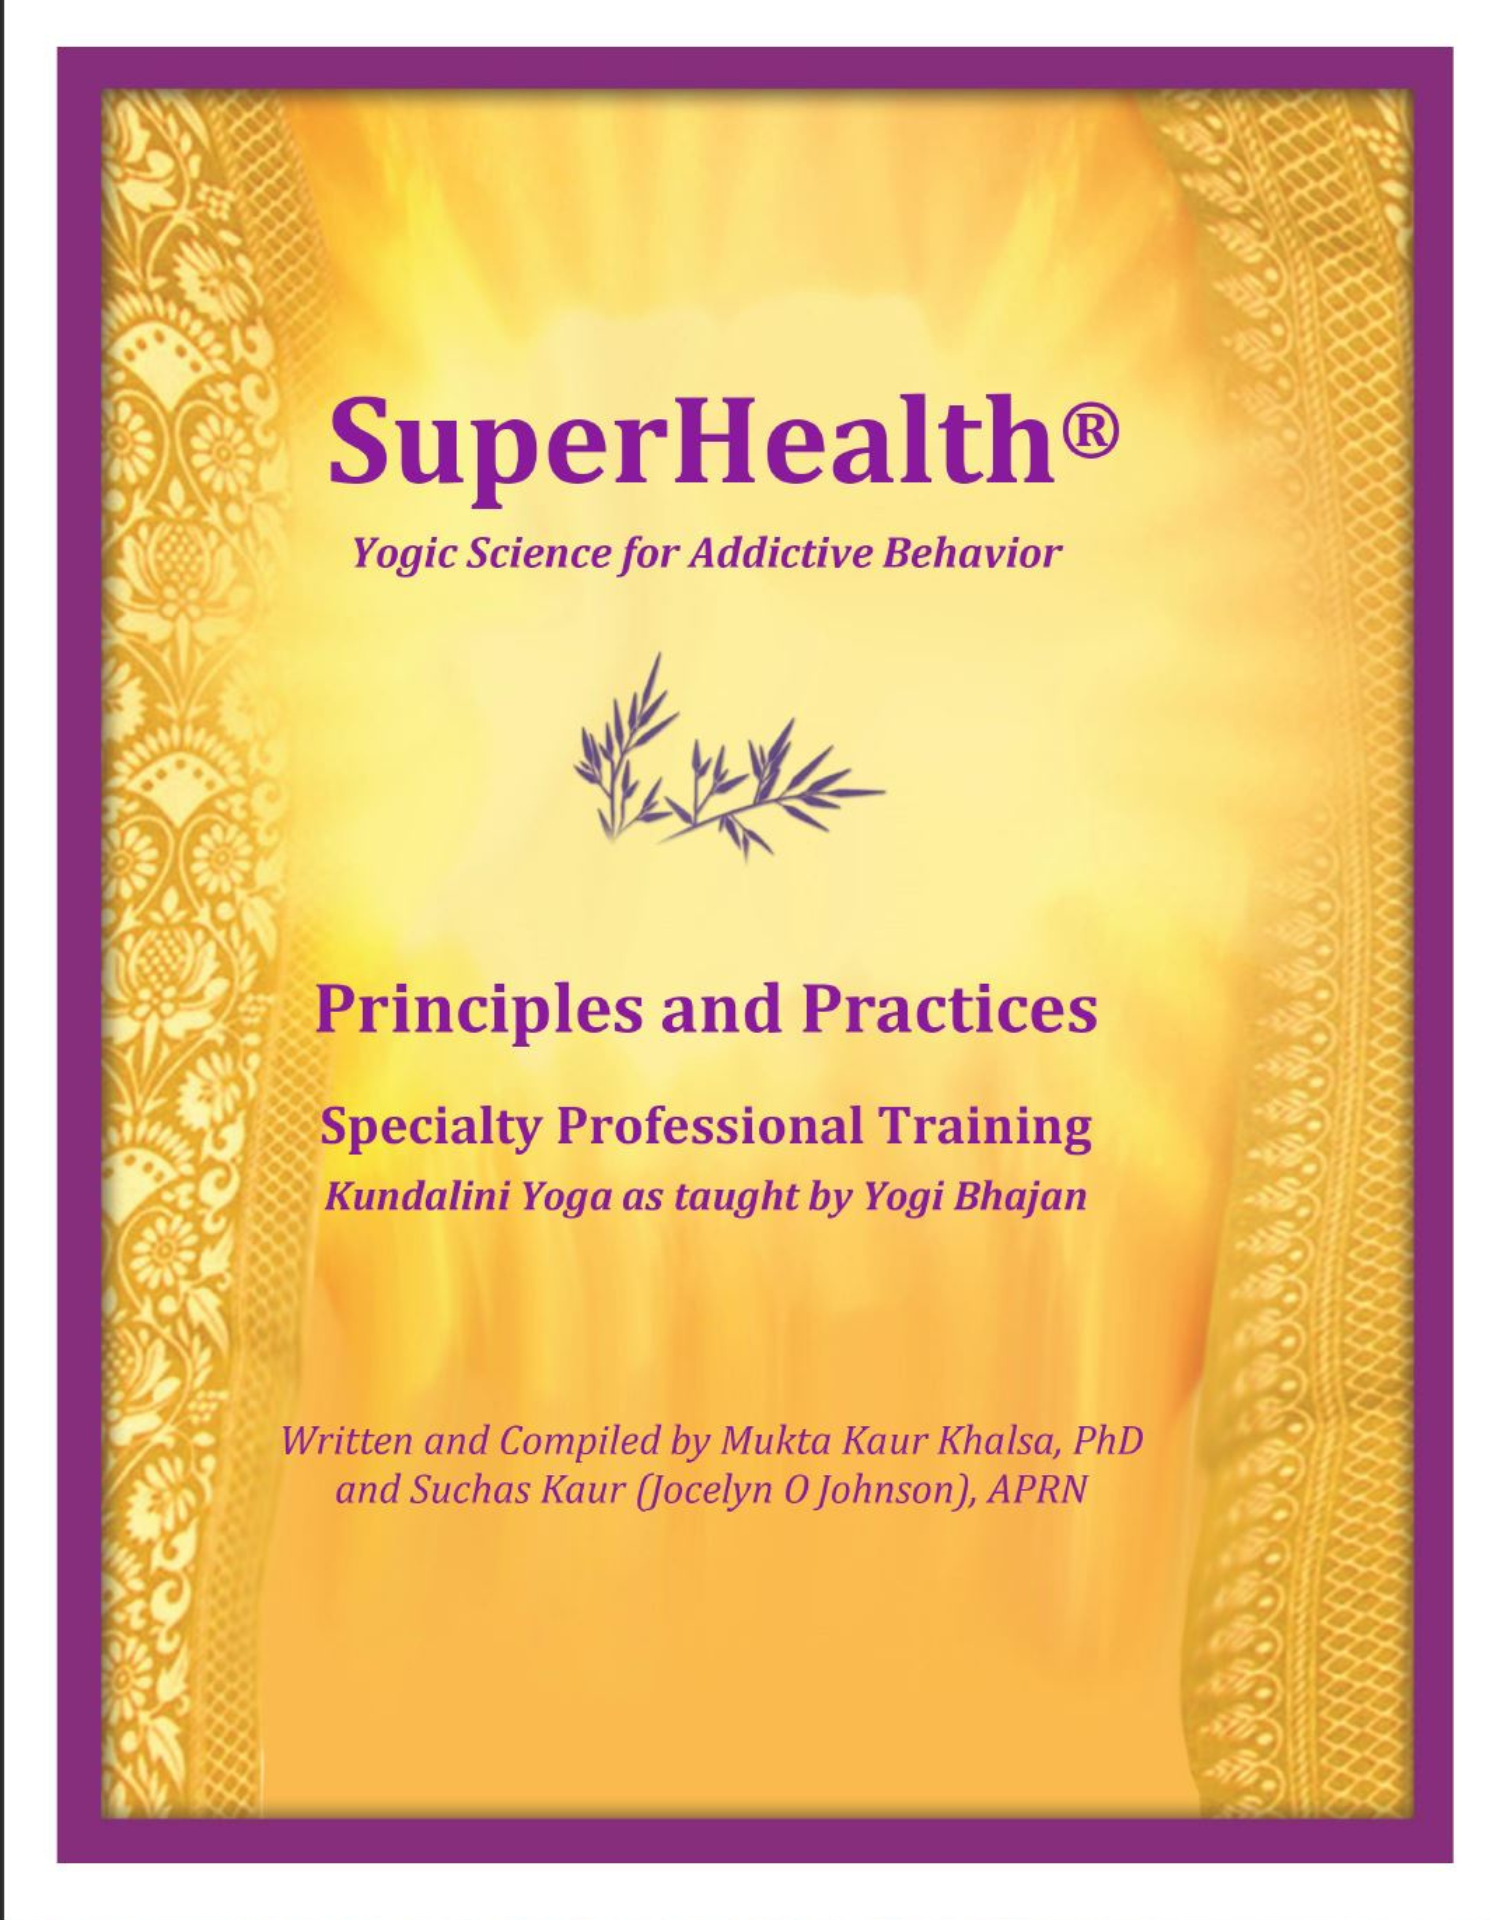 Only available at SuperHealth trainings!